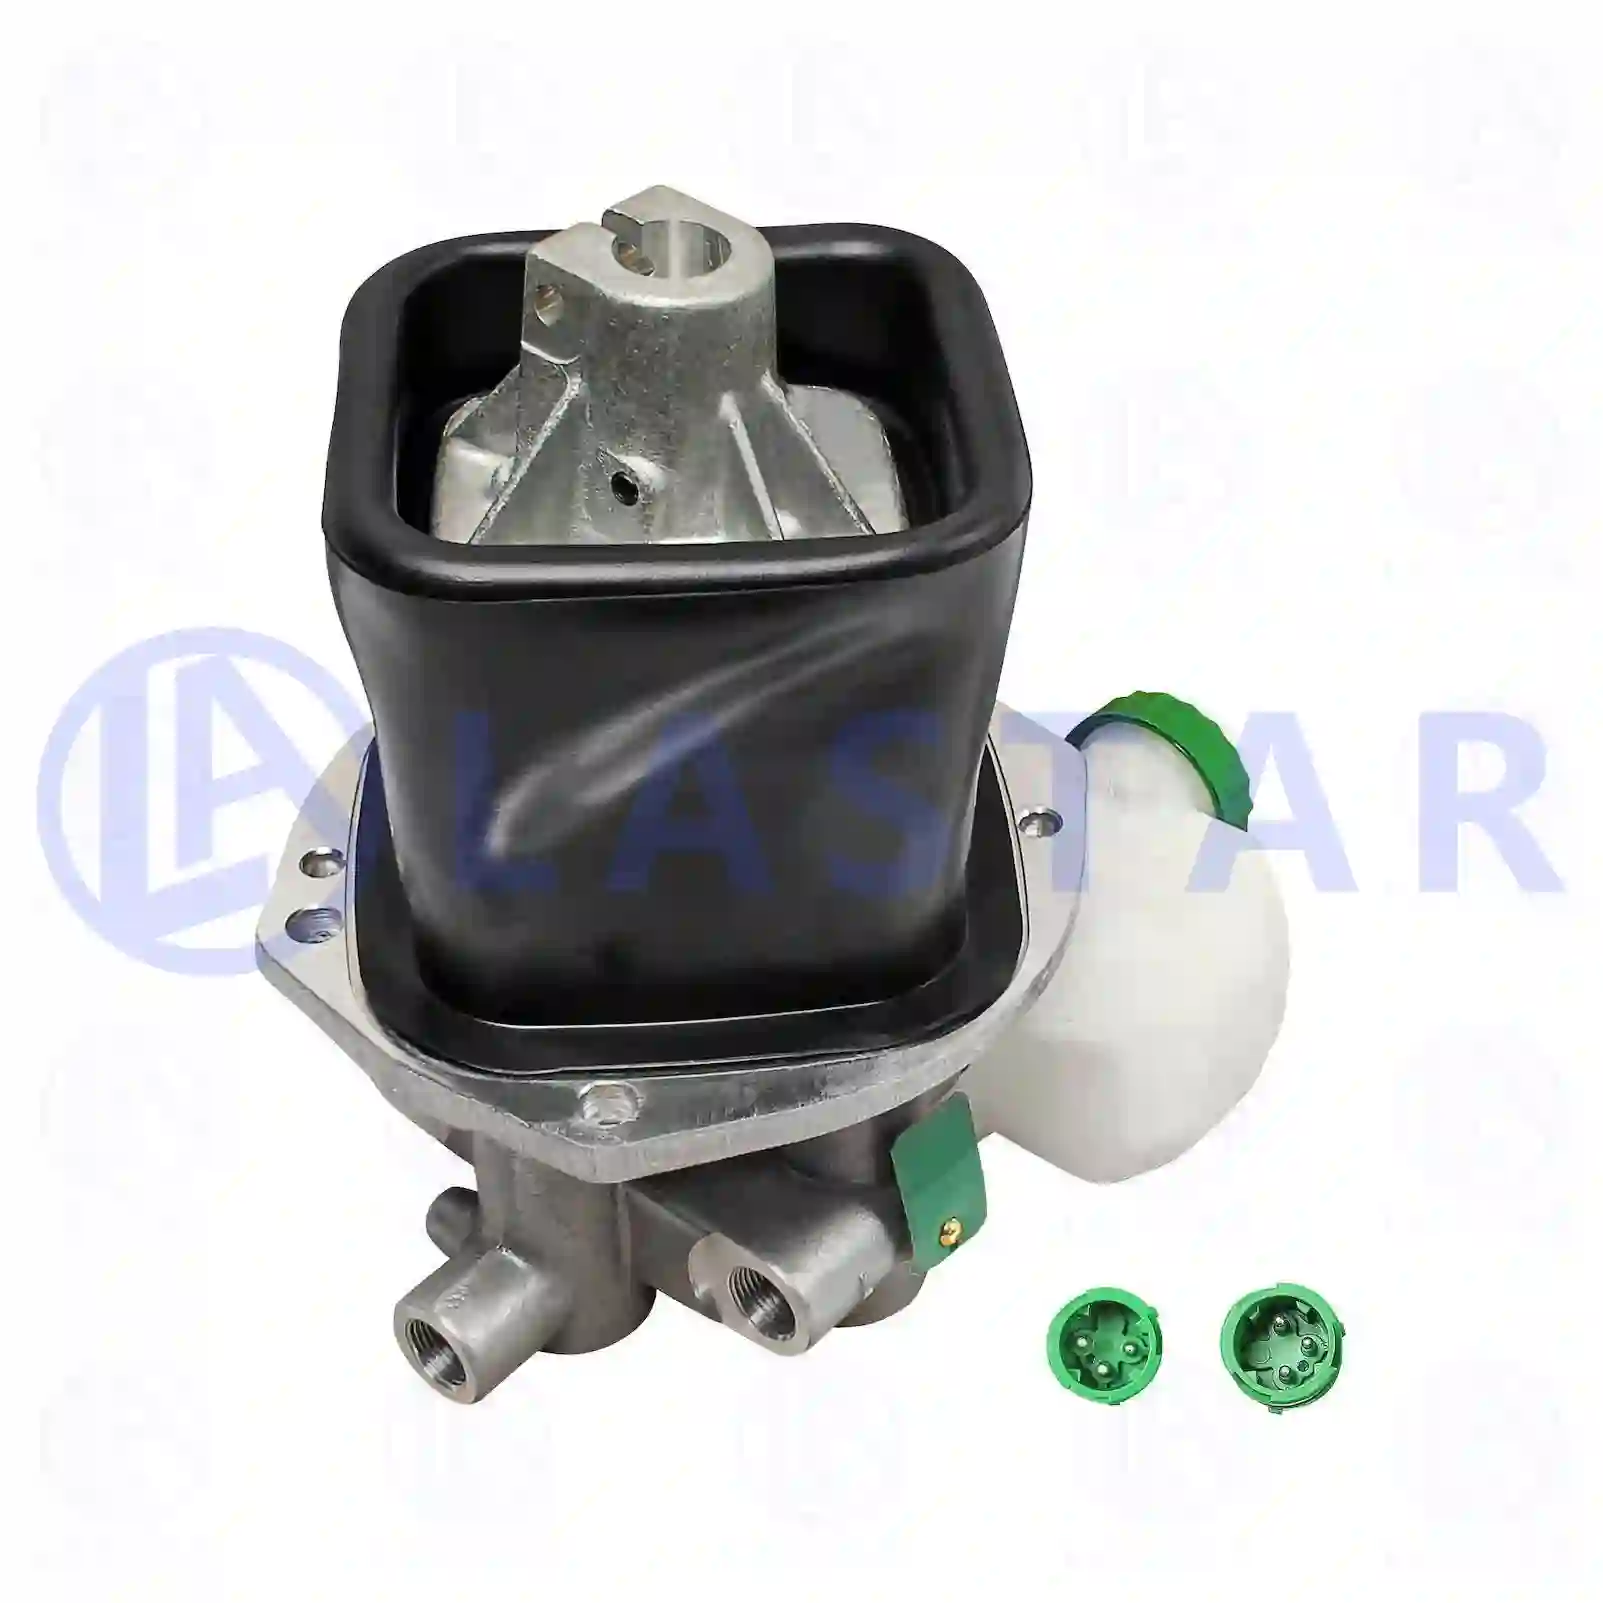 Switching device, gear shift lever, 77732798, 0002606198, 0002607998, ZG21354-0008 ||  77732798 Lastar Spare Part | Truck Spare Parts, Auotomotive Spare Parts Switching device, gear shift lever, 77732798, 0002606198, 0002607998, ZG21354-0008 ||  77732798 Lastar Spare Part | Truck Spare Parts, Auotomotive Spare Parts